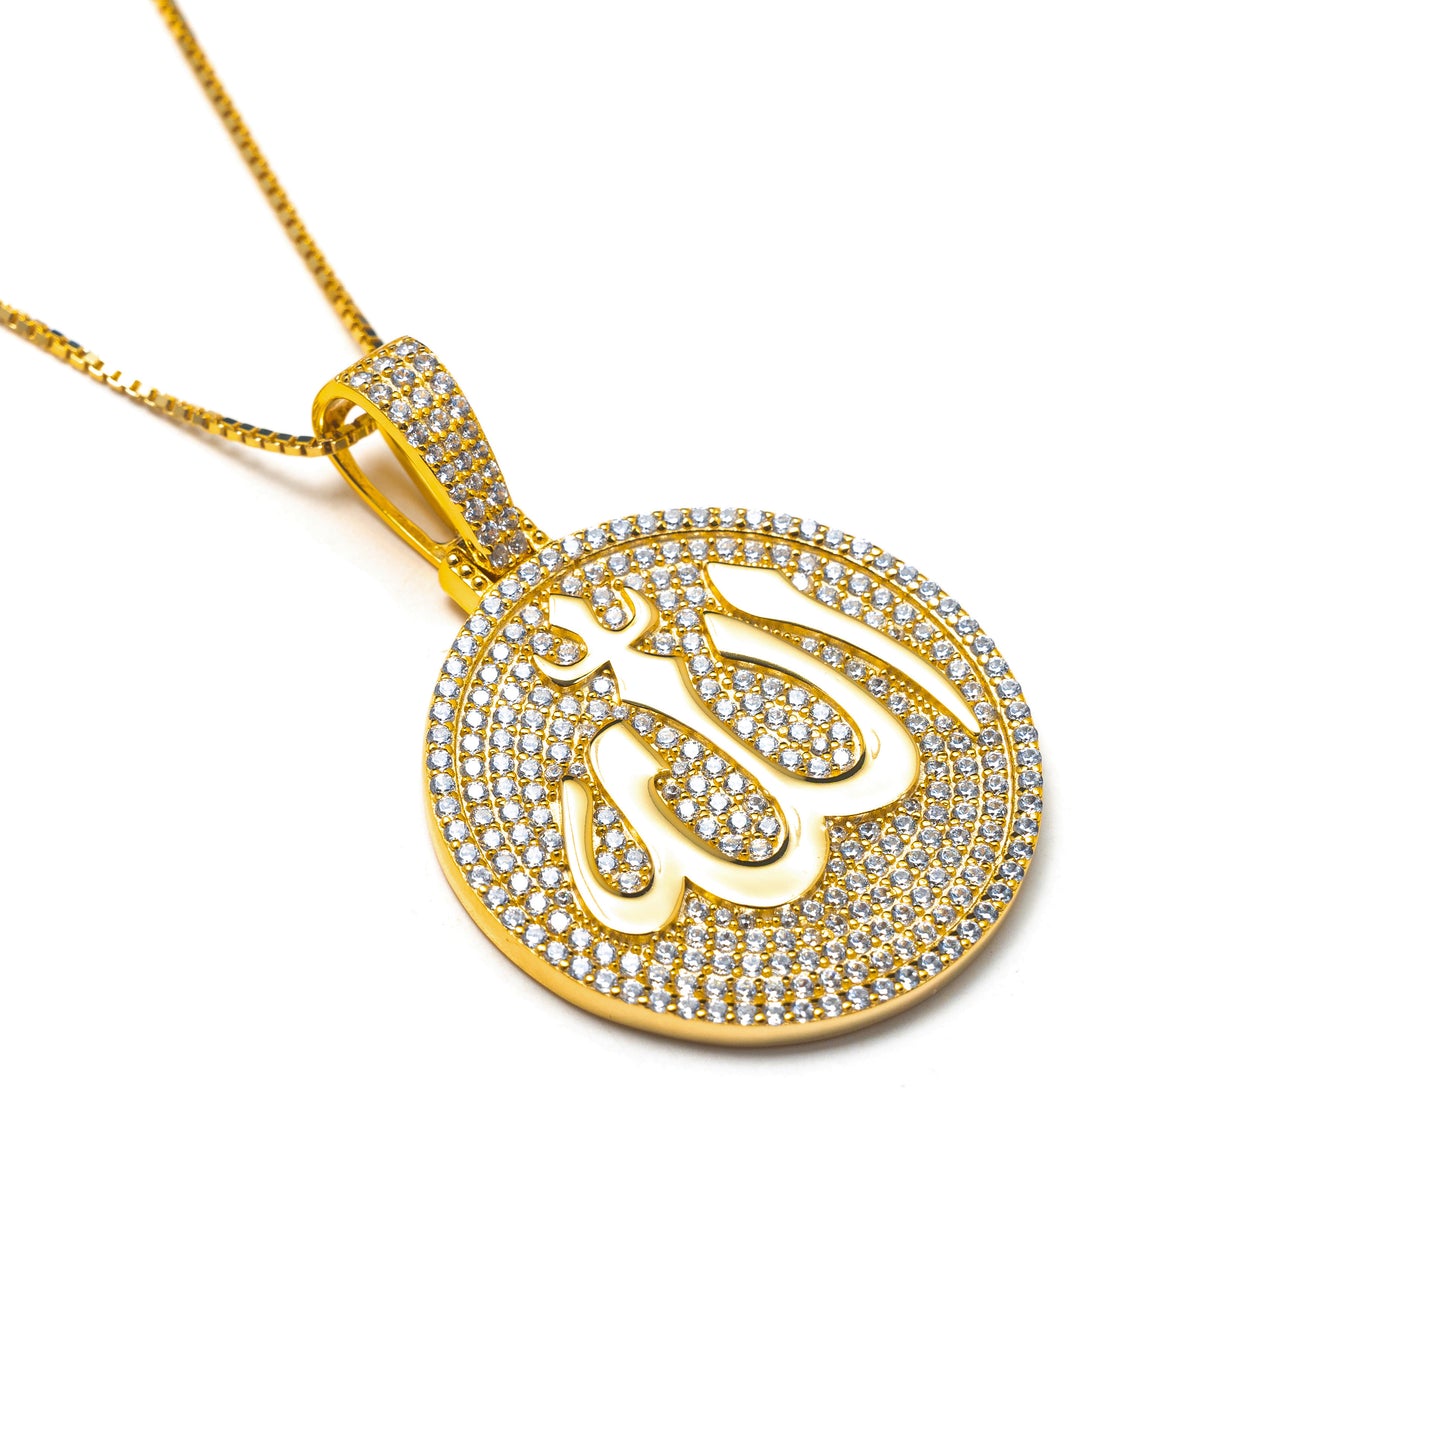 ICY ALLAH MEDALLION NECKLACE